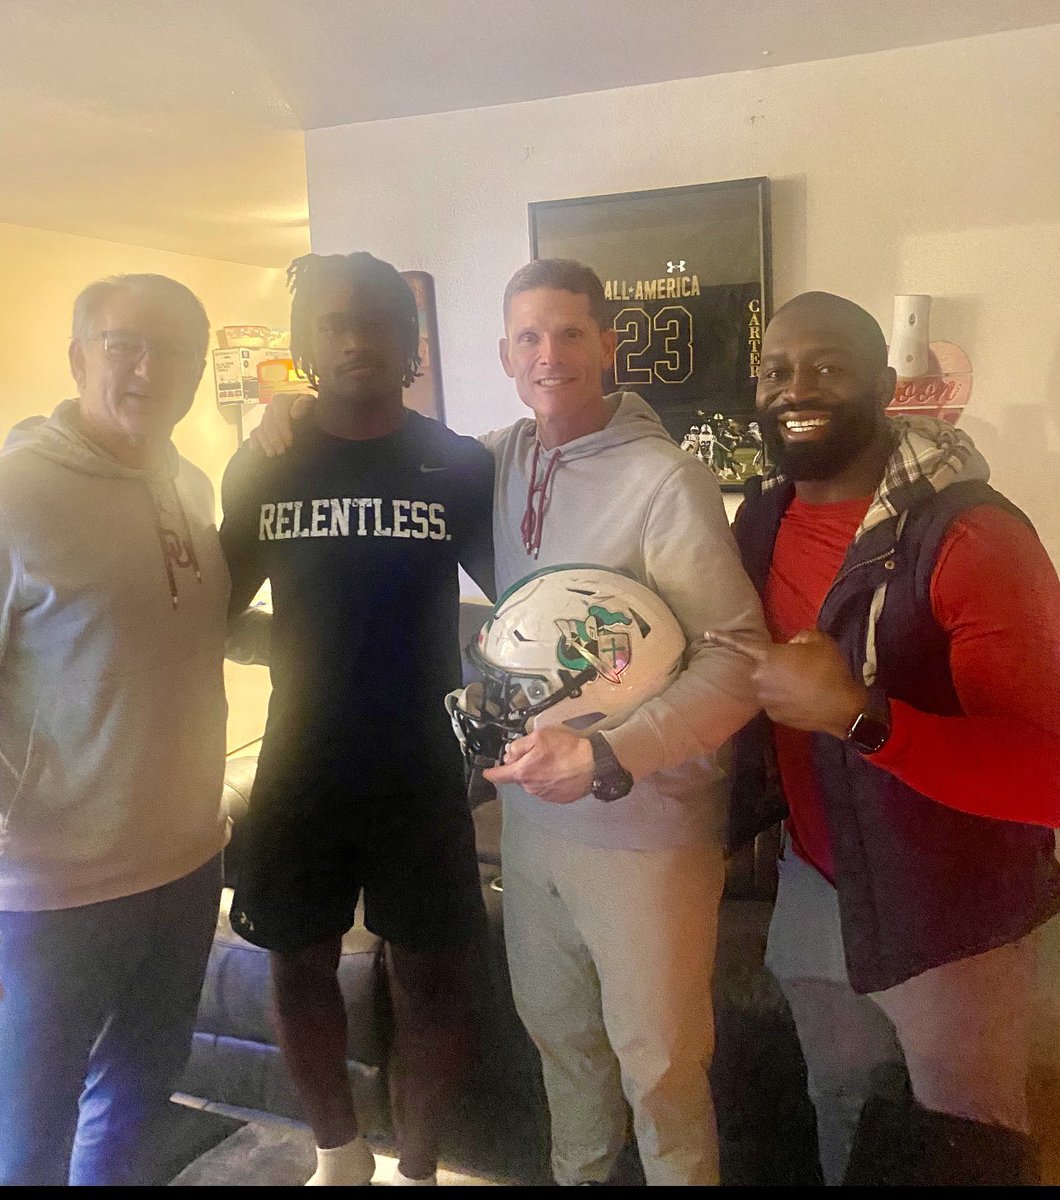 Oklahoma Commit Lewis Carter  @LewisCarter_4 spent some time with @CoachVenables , his future head coach and Defensive Coordinator @CoachTedRoof along with Defensive Back Coach @JayValai last night during his in home visit! #TampaCatholicFootball #BoomerSooner